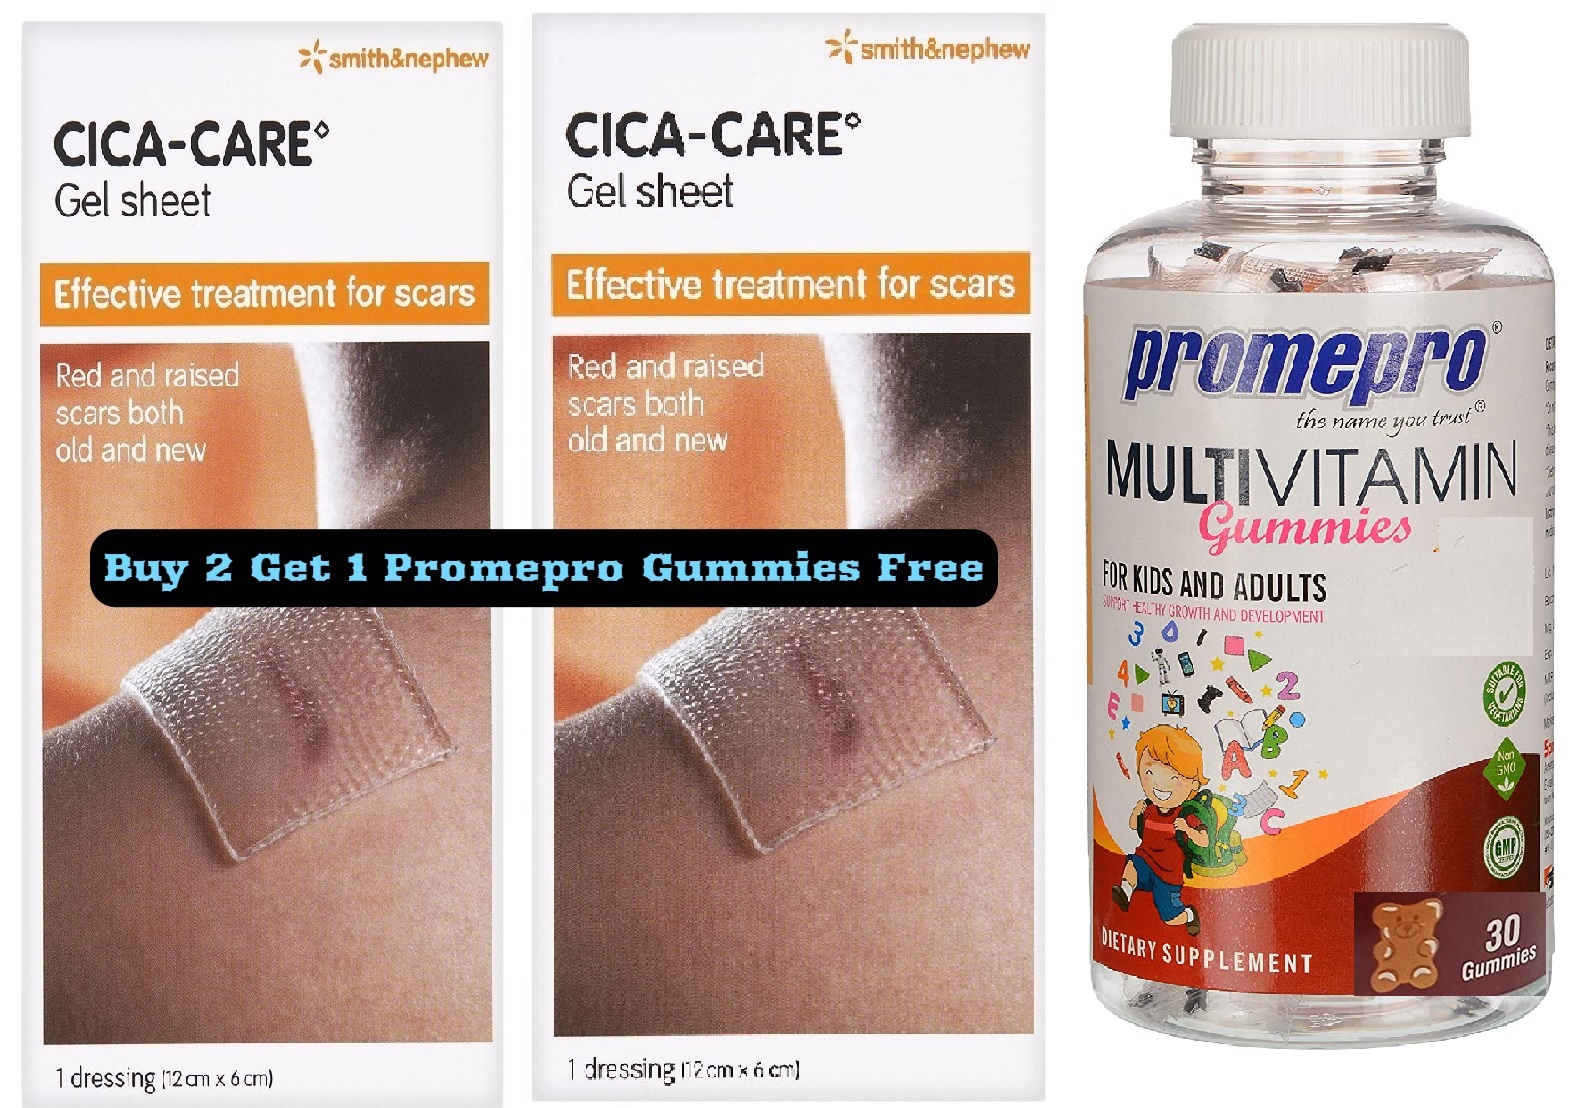  CICA-CARE Silicon Gel Sheet (12cm 6 cm ) Buy 2 Get 1 Promepro Gummies Free